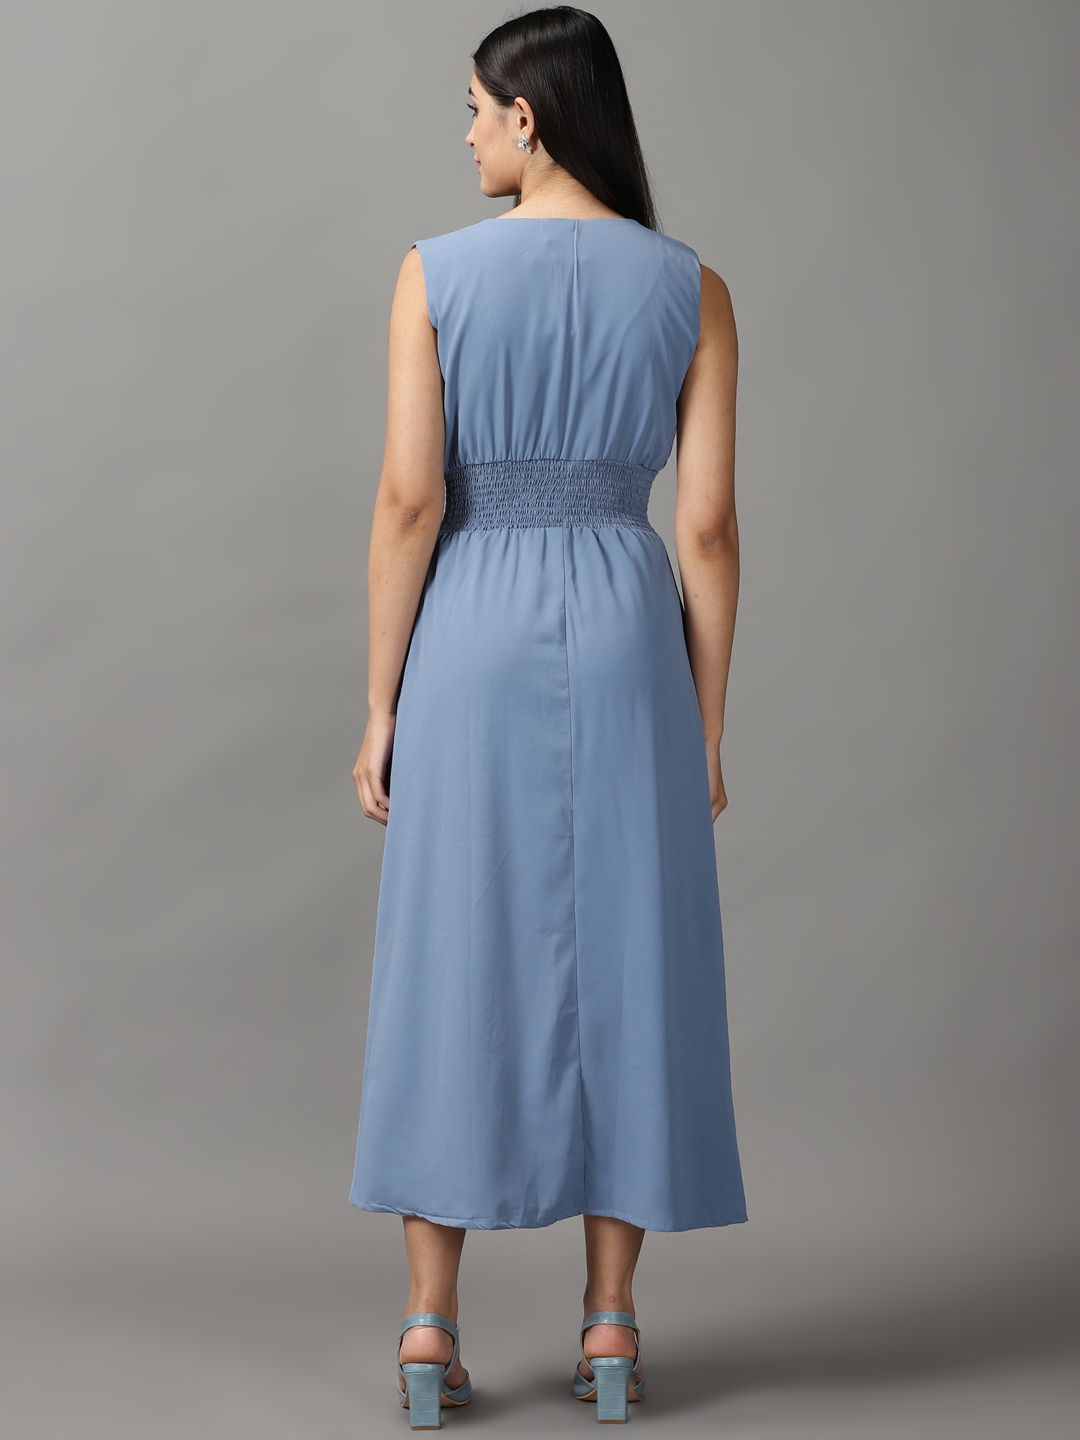 Showoff | SHOWOFF Women Blue Solid Round Neck Sleeveless Maxi A-Line Dress 3